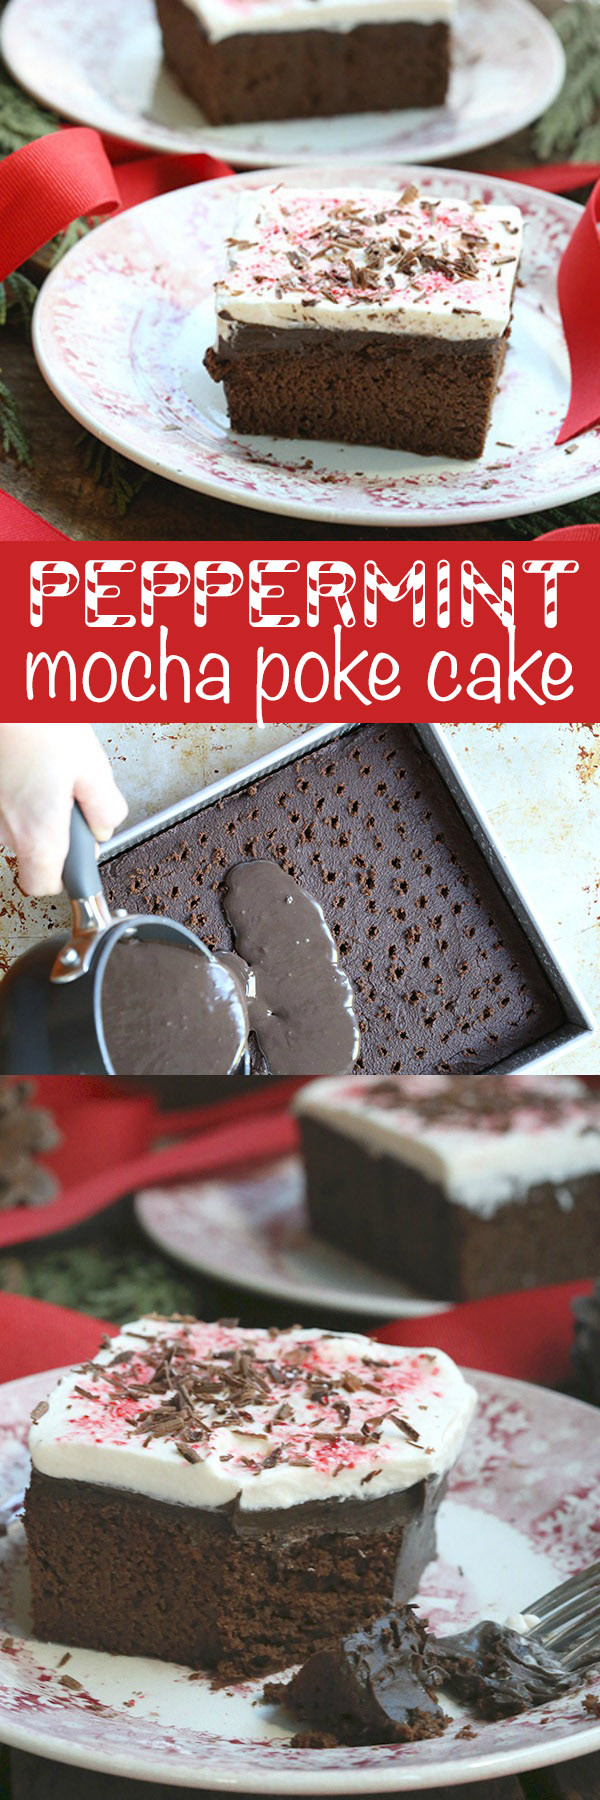 Low Carb Holiday Desserts
 This is the low carb holiday dessert recipe you ve been